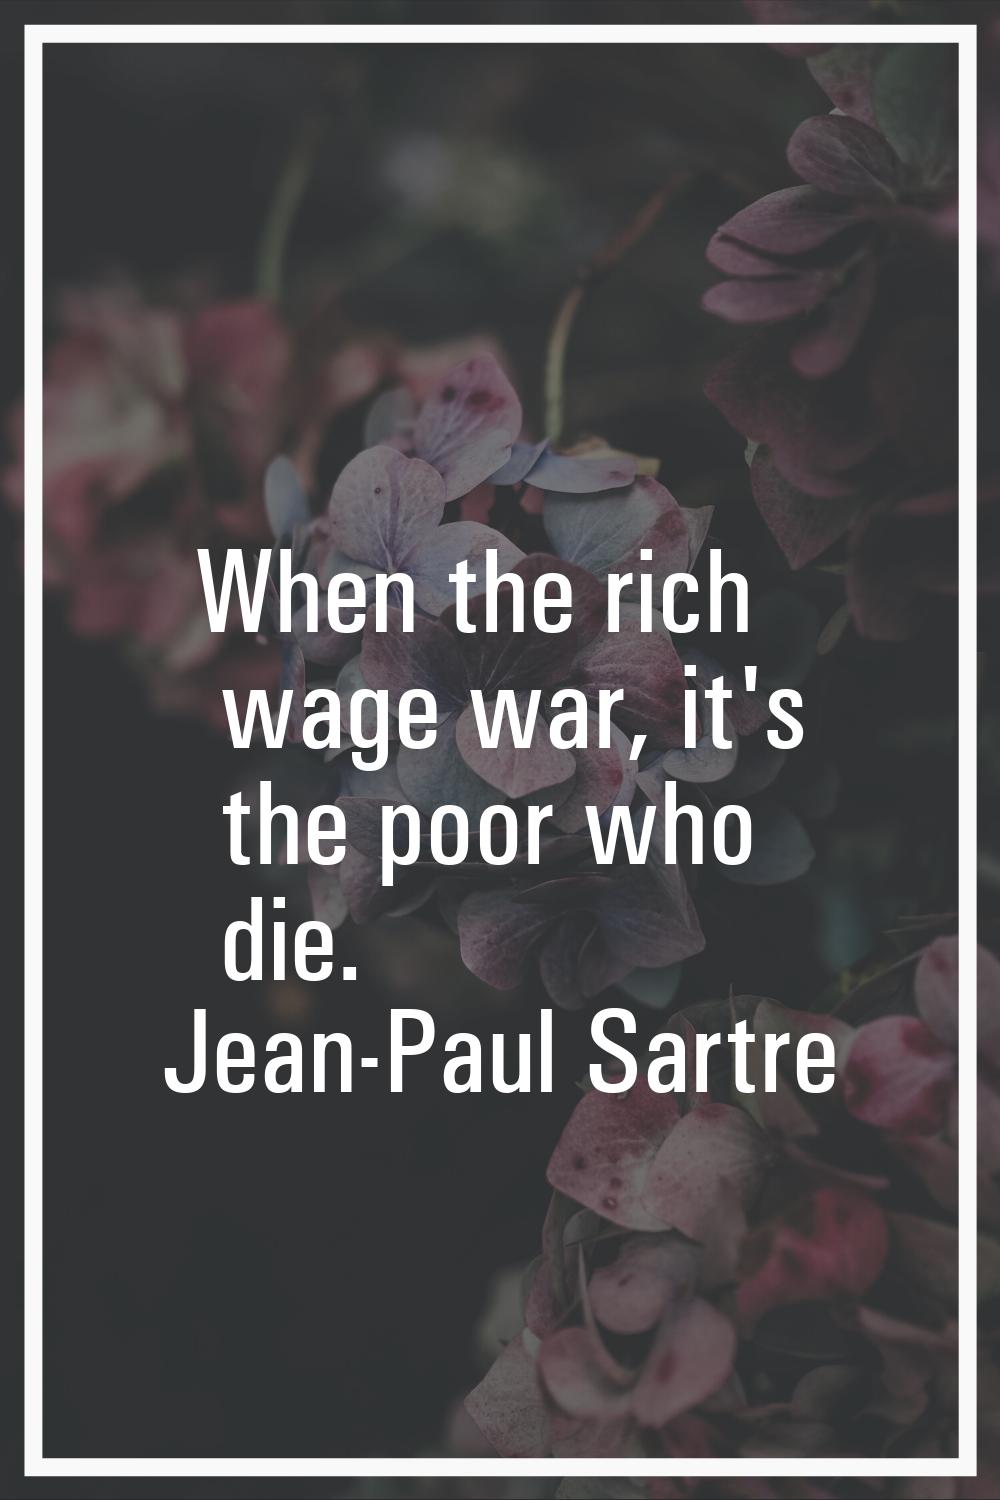 When the rich wage war, it's the poor who die.